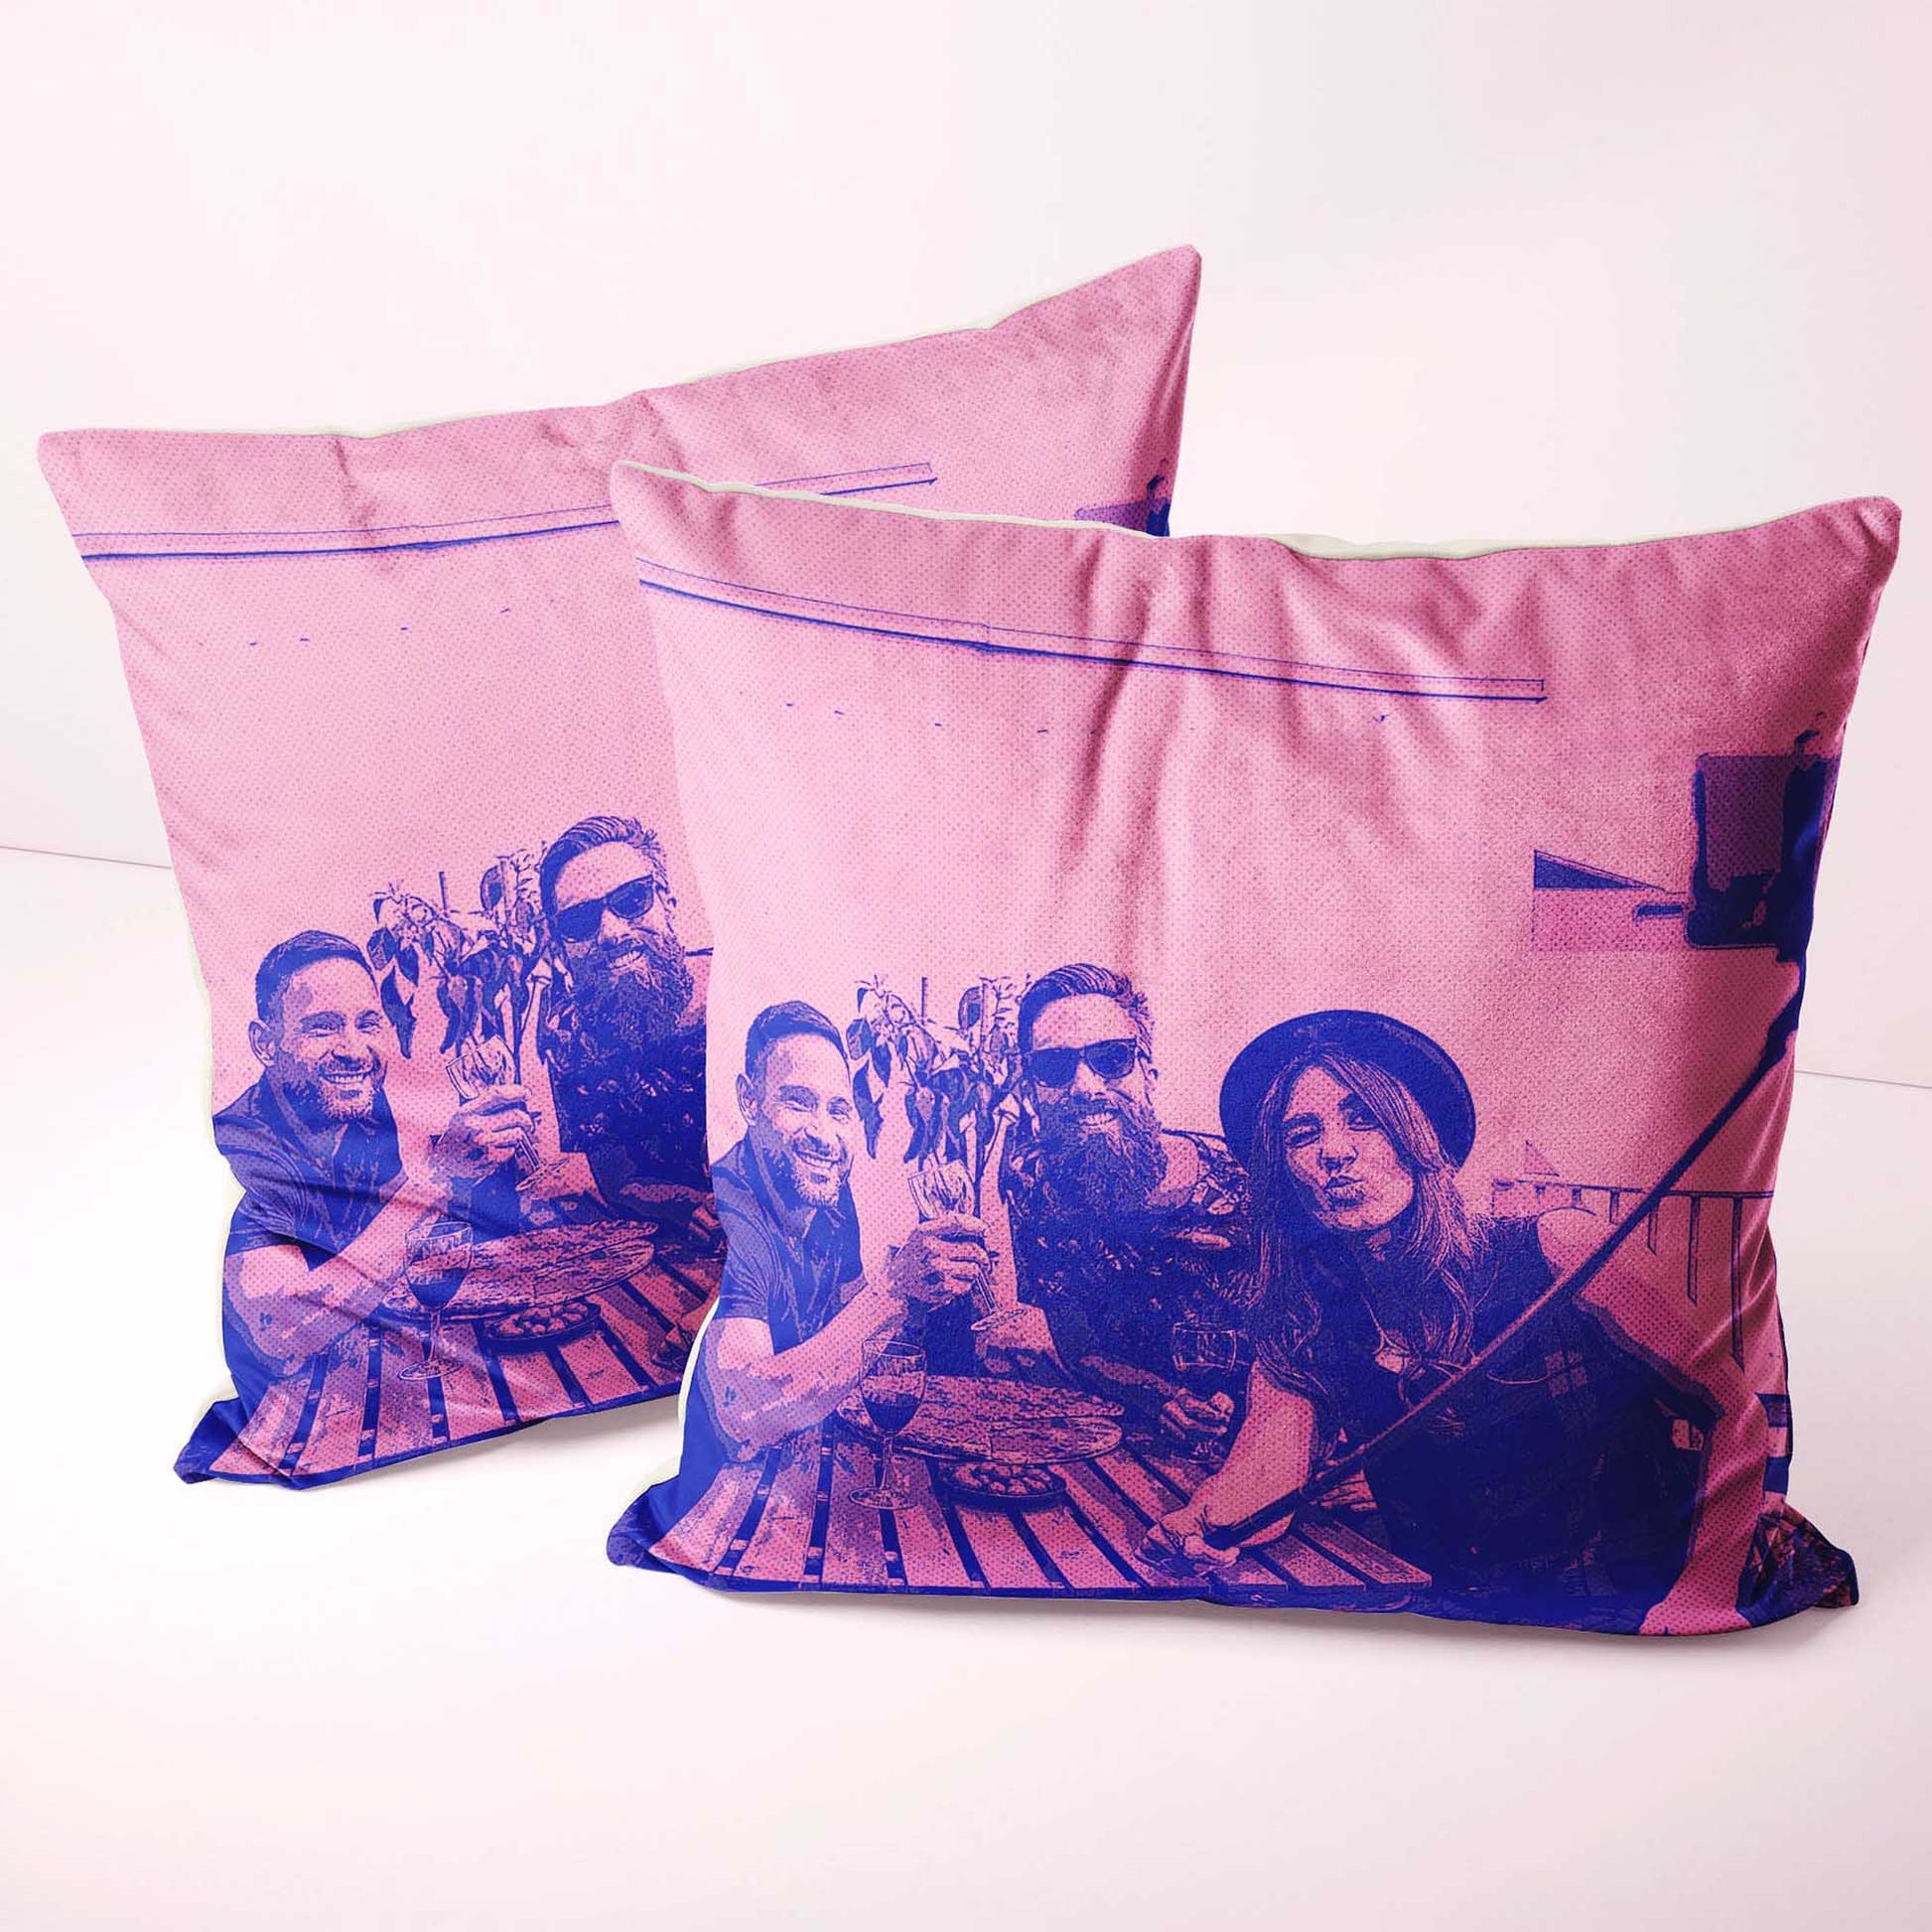 Transport yourself back in time with our Personalised Purple and Pink Comics Cushion. Featuring a retro-inspired cartoon design, this handmade cushion captures the essence of old-school charm. Transform your photo into a personalized comic 